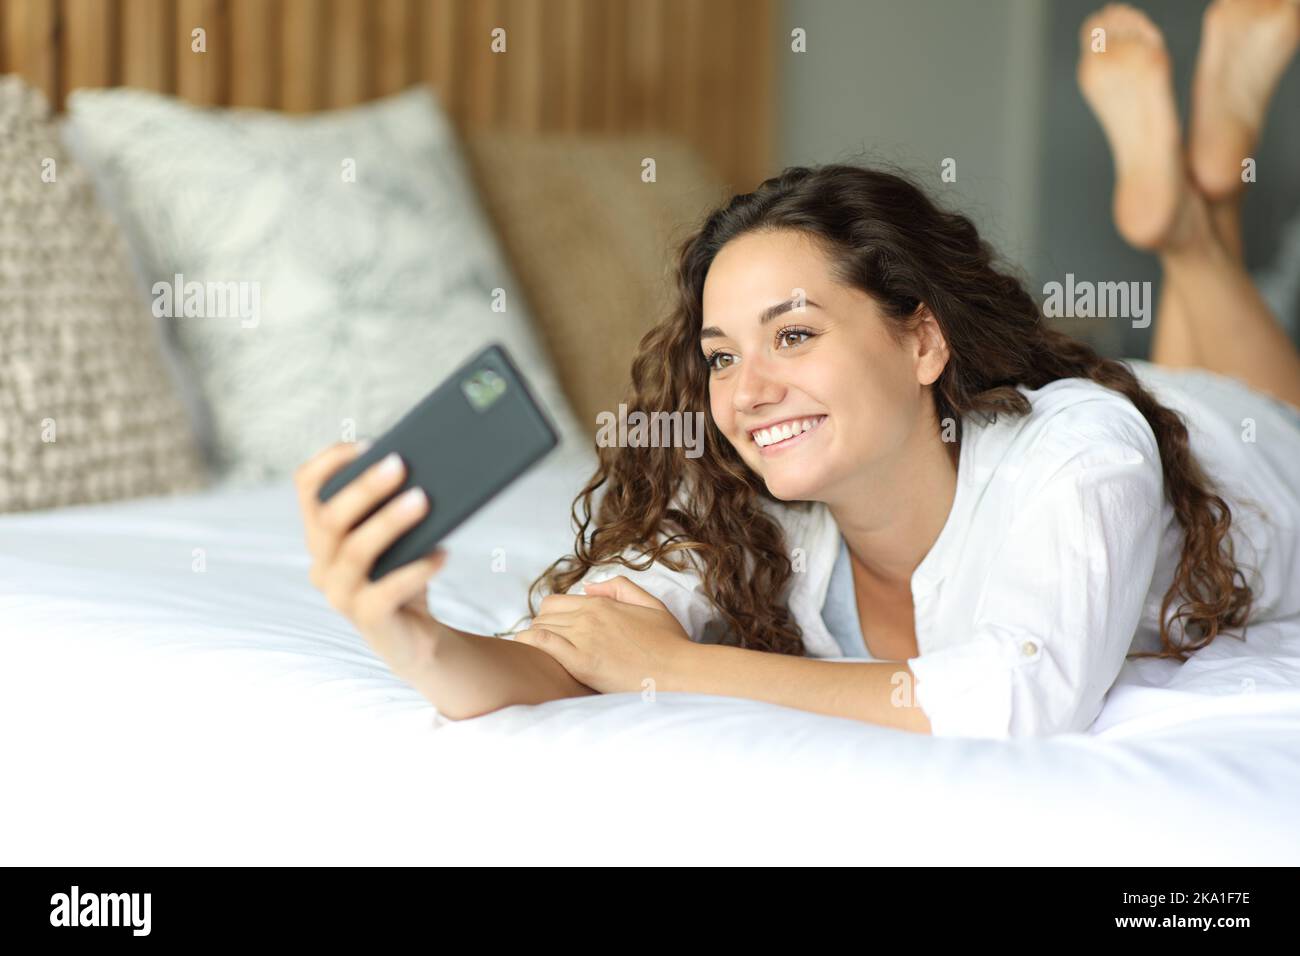 Happy woman lying on a bed taking selfie or recording video with phone Stock Photo